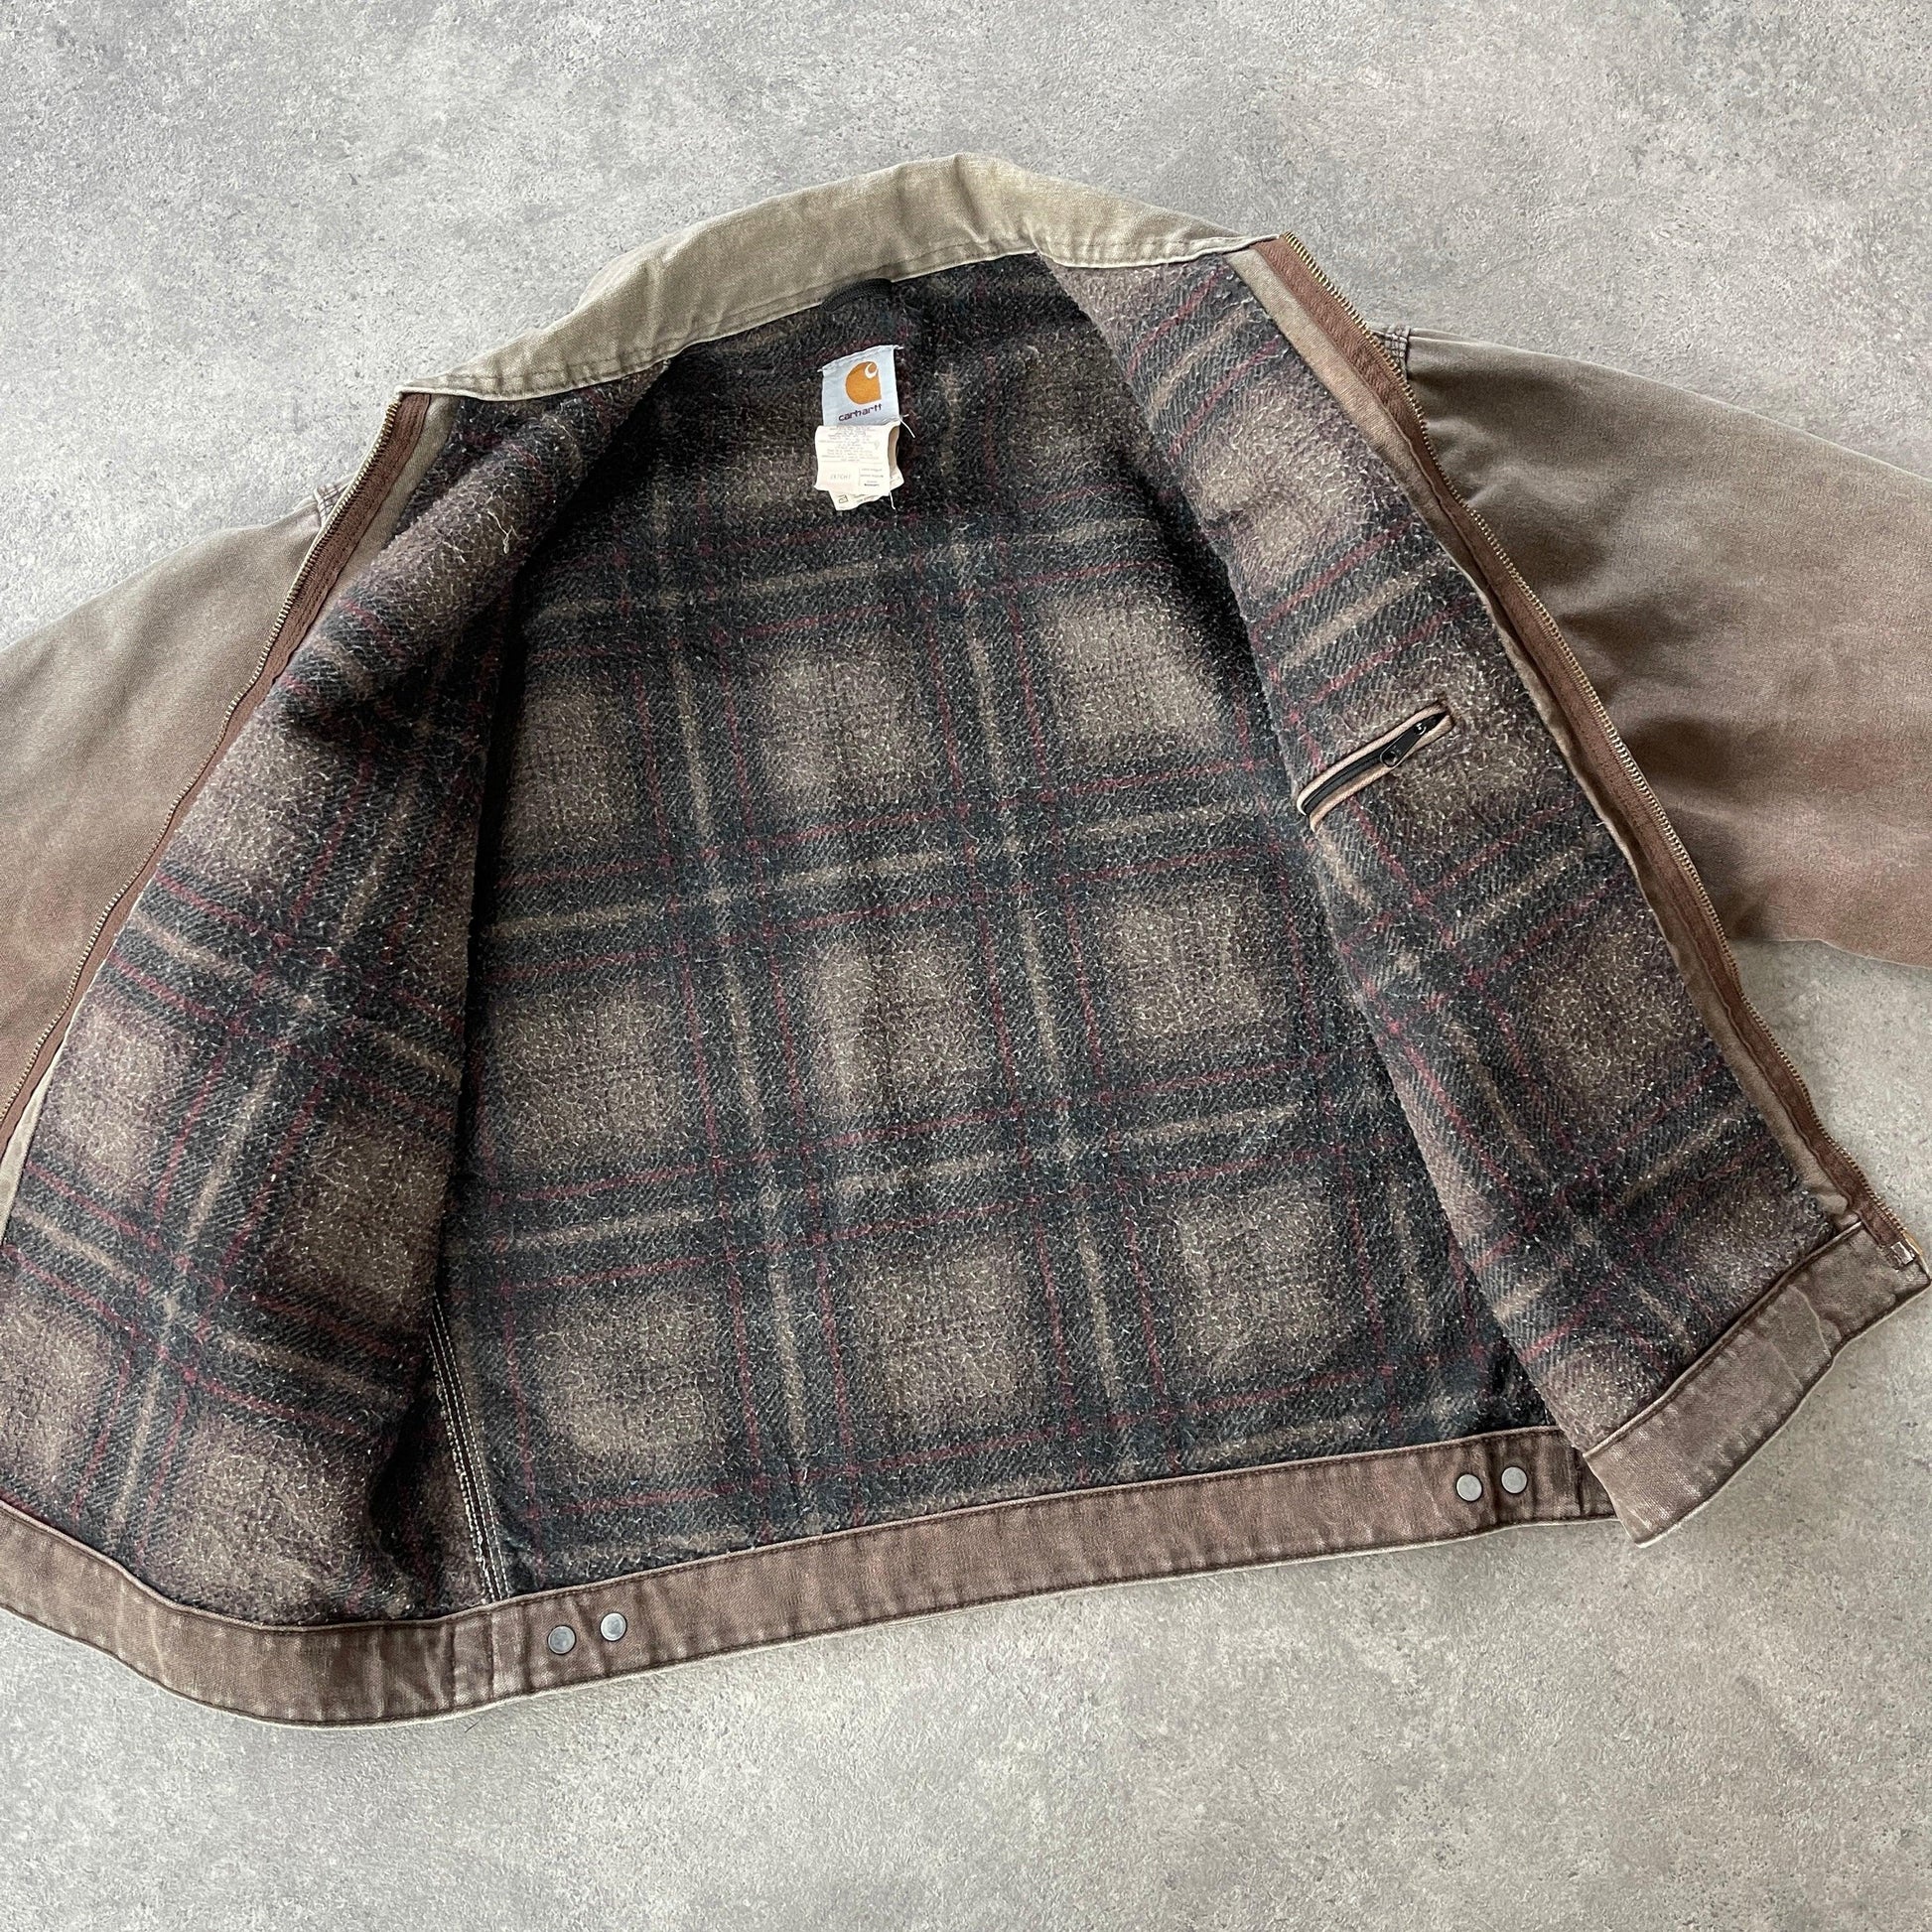 Carhartt RARE 2002 heavyweight blanket lined Detroit jacket (L) - Known Source